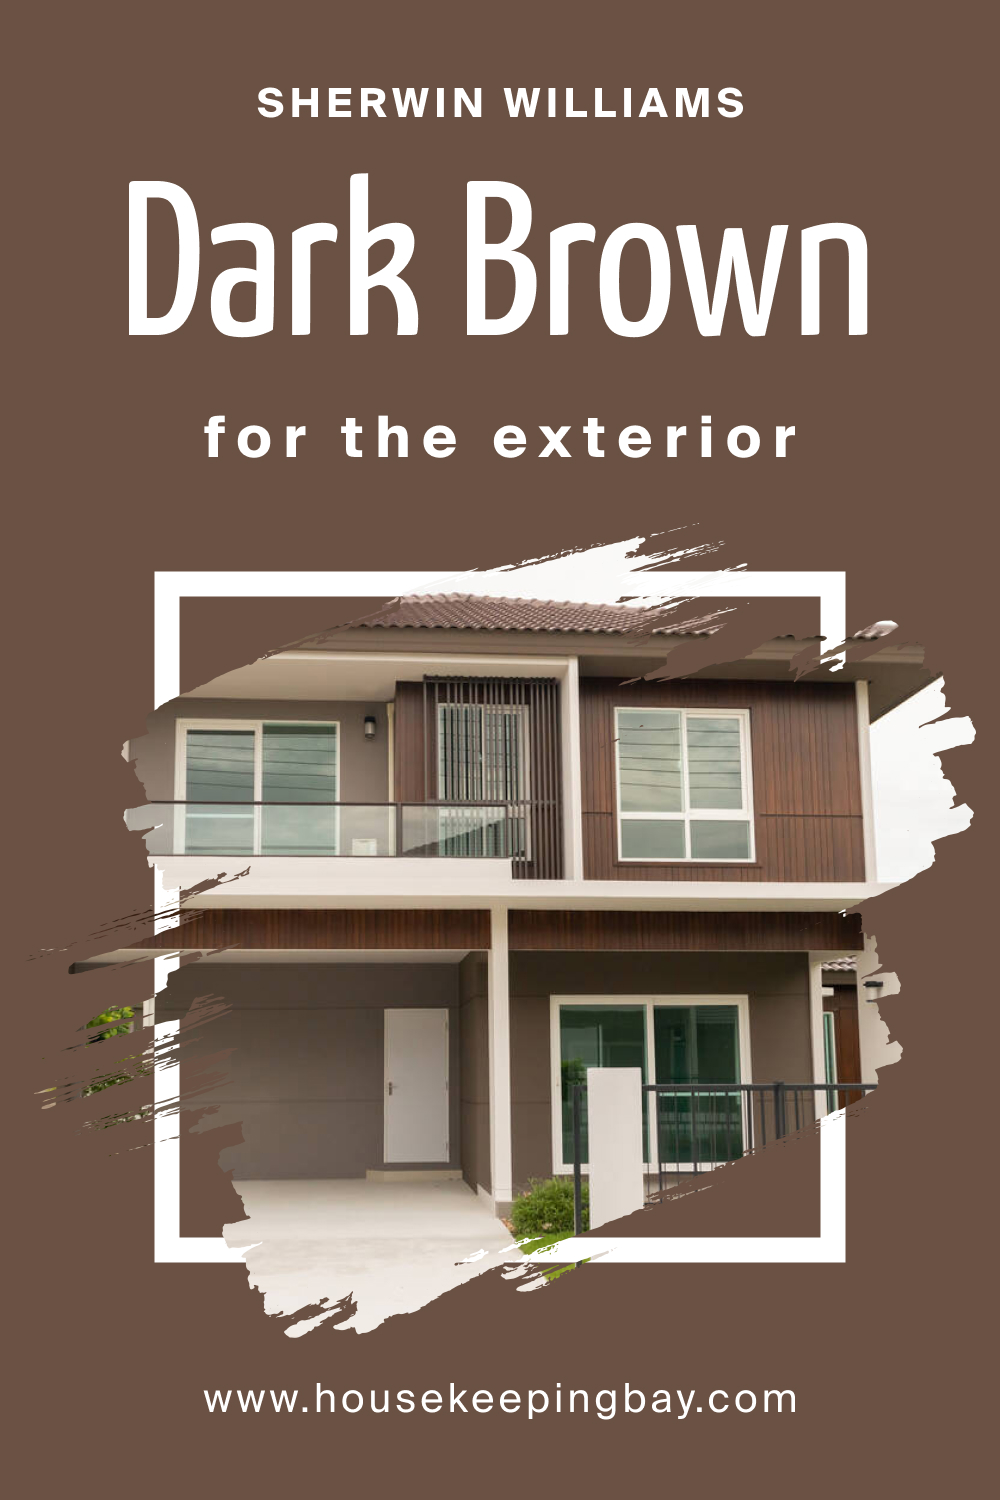 Sherwin Williams. SW 7520 Dark Brown For the exterior